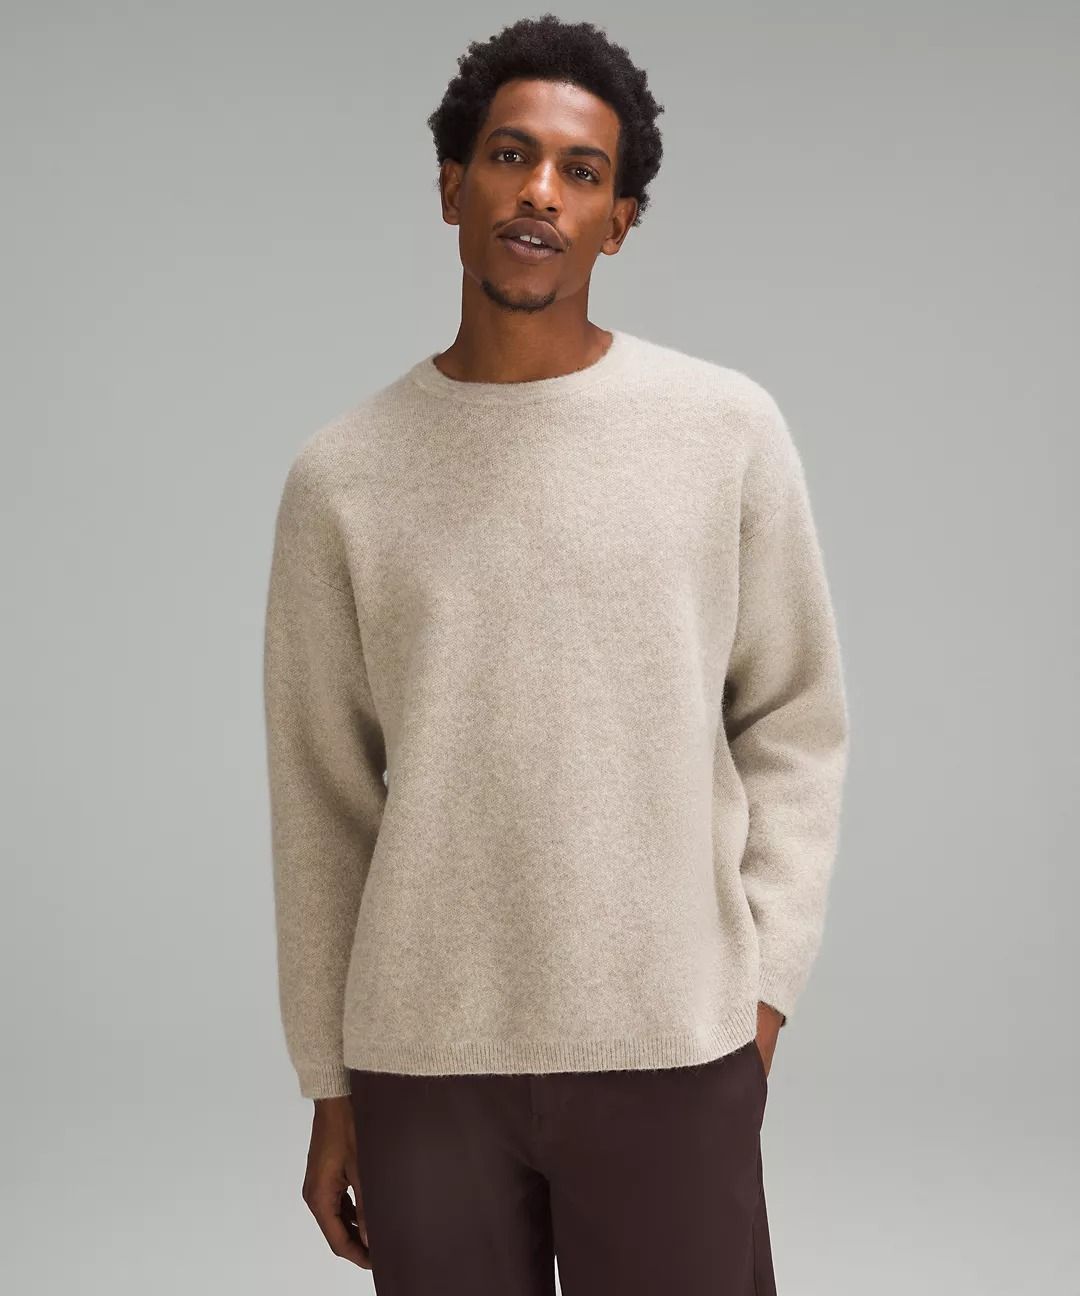 21 Best Sweaters for Men in 2023, Tested by Style Editors